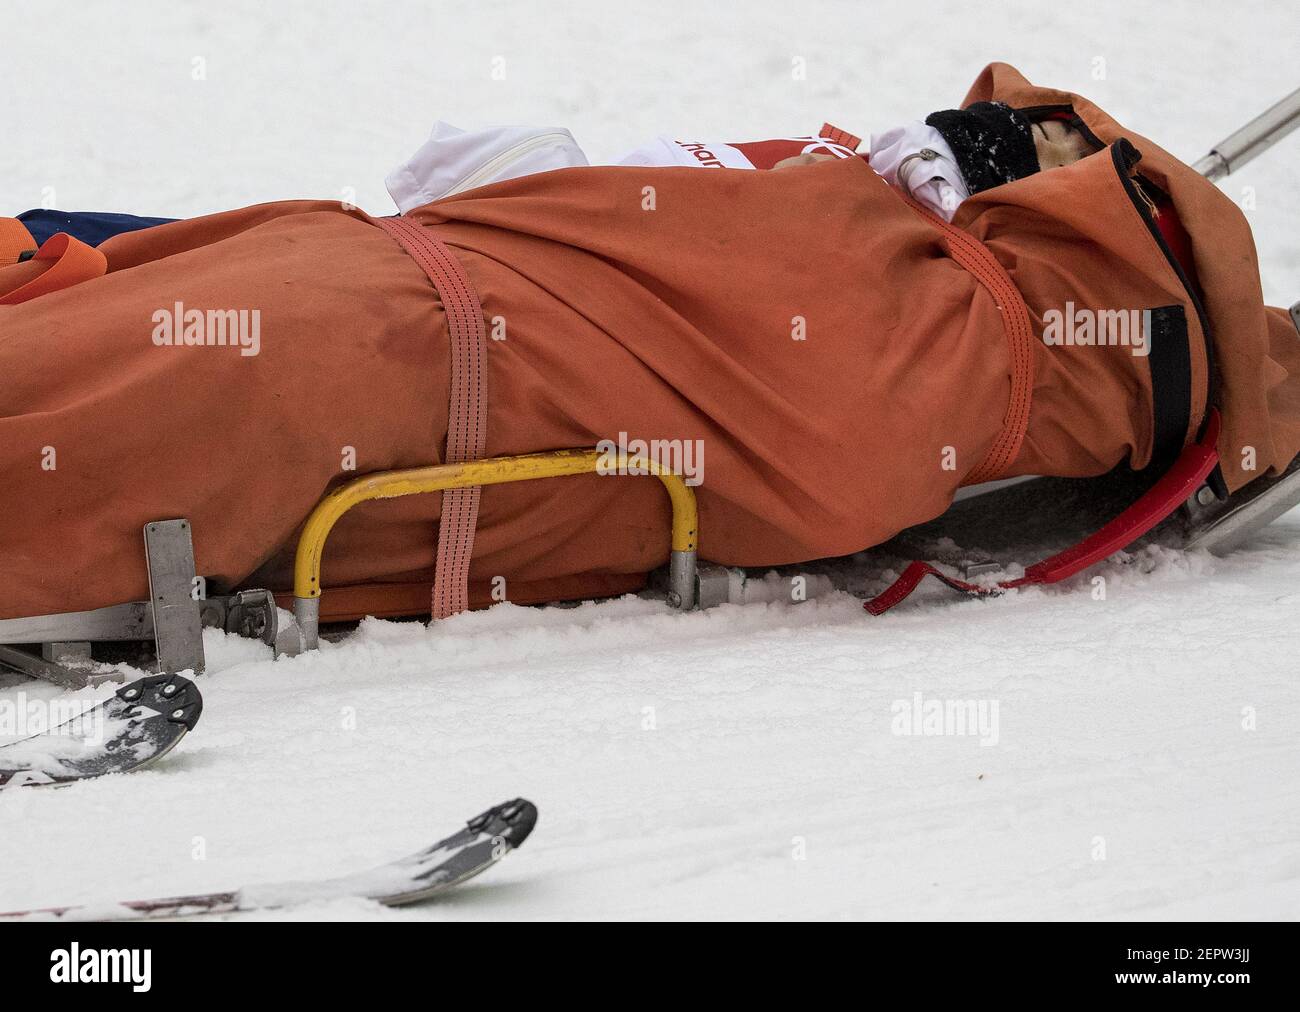 Yuto Totsuka of Japan was taken of the course after a crash in the Men's Half Pipe Snowboard finals at Phoenix Park in South Korea on Wednesday, Feb. 14, 2018, during the Pyeongchang Winter Olympics. (Photo by Carlos Gonzalez/Minneapolis Star Tribune/TNS/Sipa USA) Stock Photo